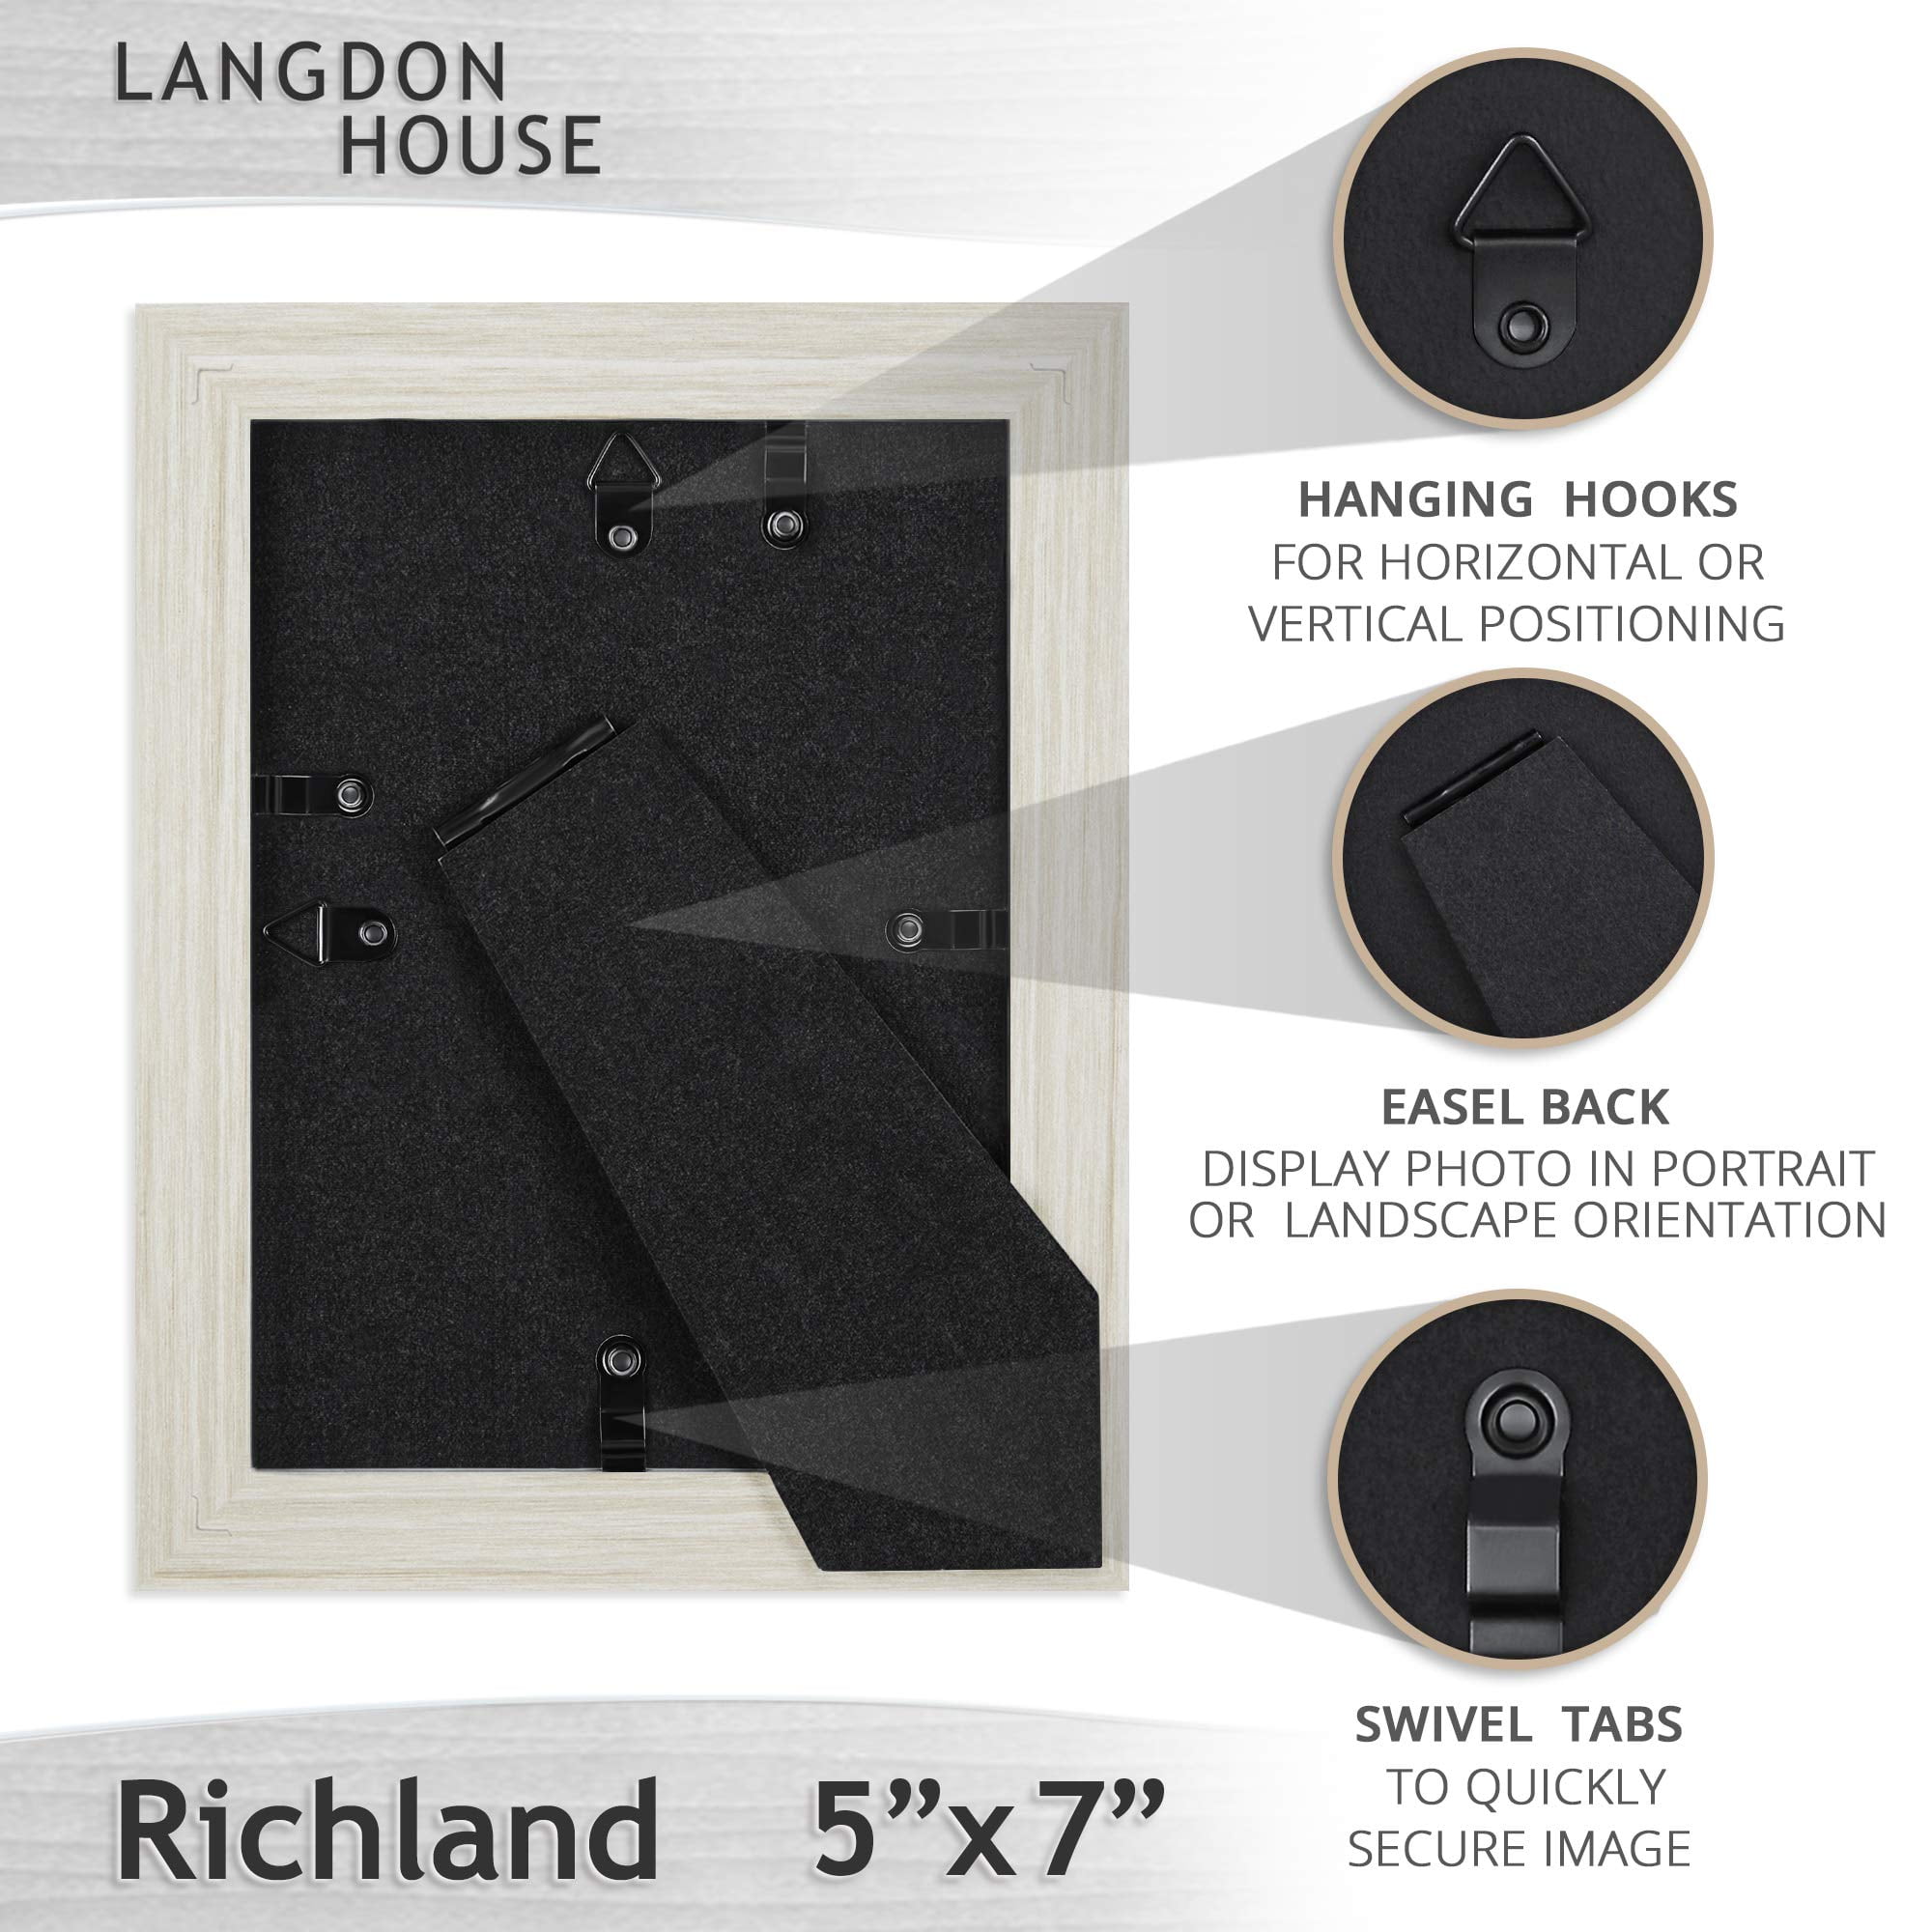  Langdon House 8x10 Black Picture Frame w/Removable Mat to 5x7,  Modern Step-Down Molding, Tabletop Easel Included, Estate Collection